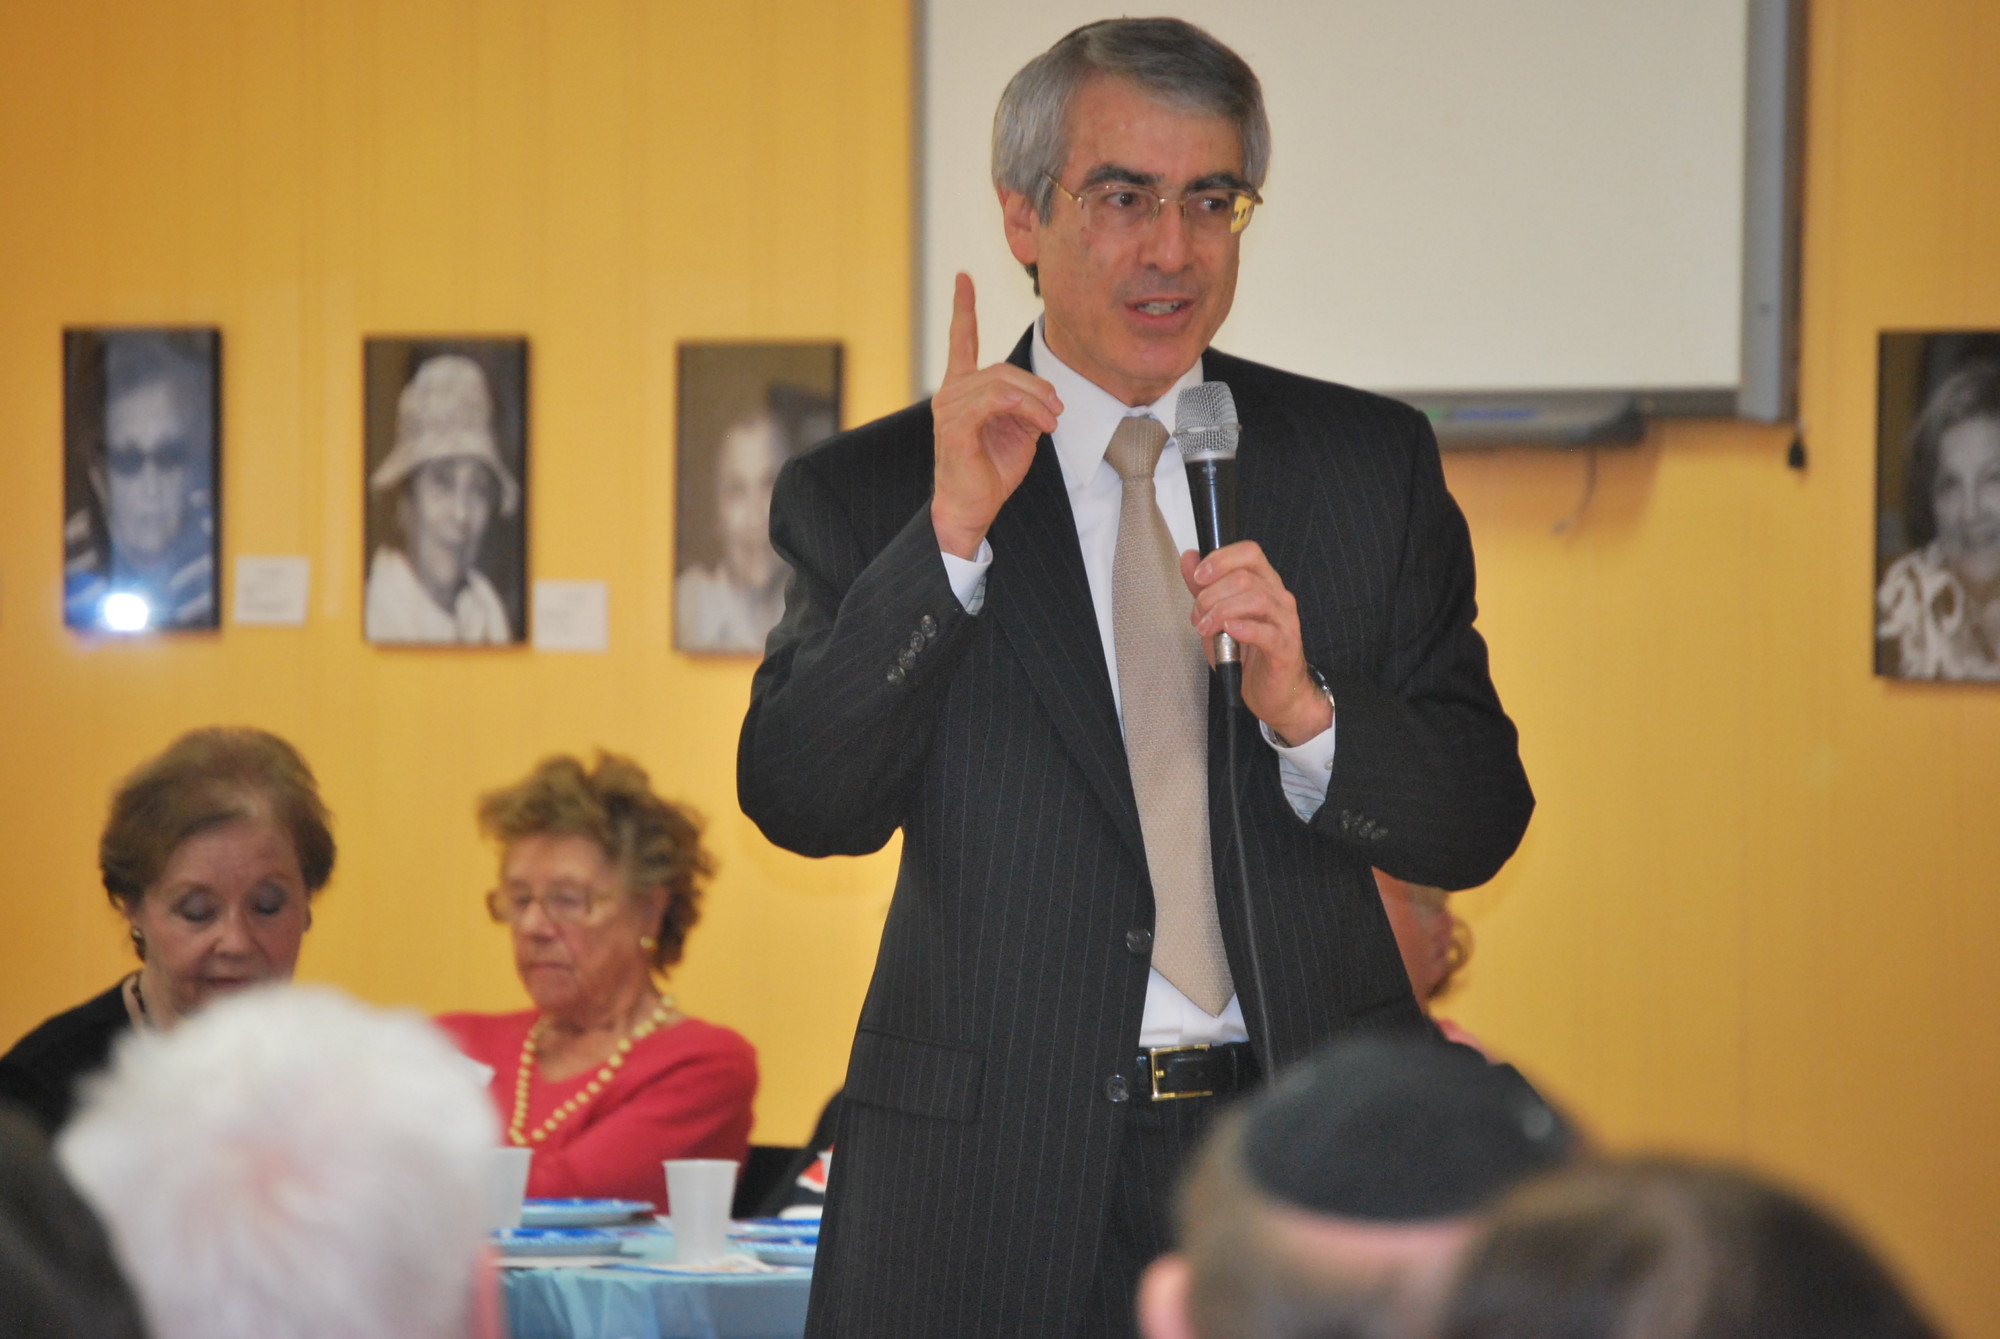 Rabbi Bruce Ginsburg of  Congregation Sons of Israel spoke to the Holocaust survivors at the JCC party.